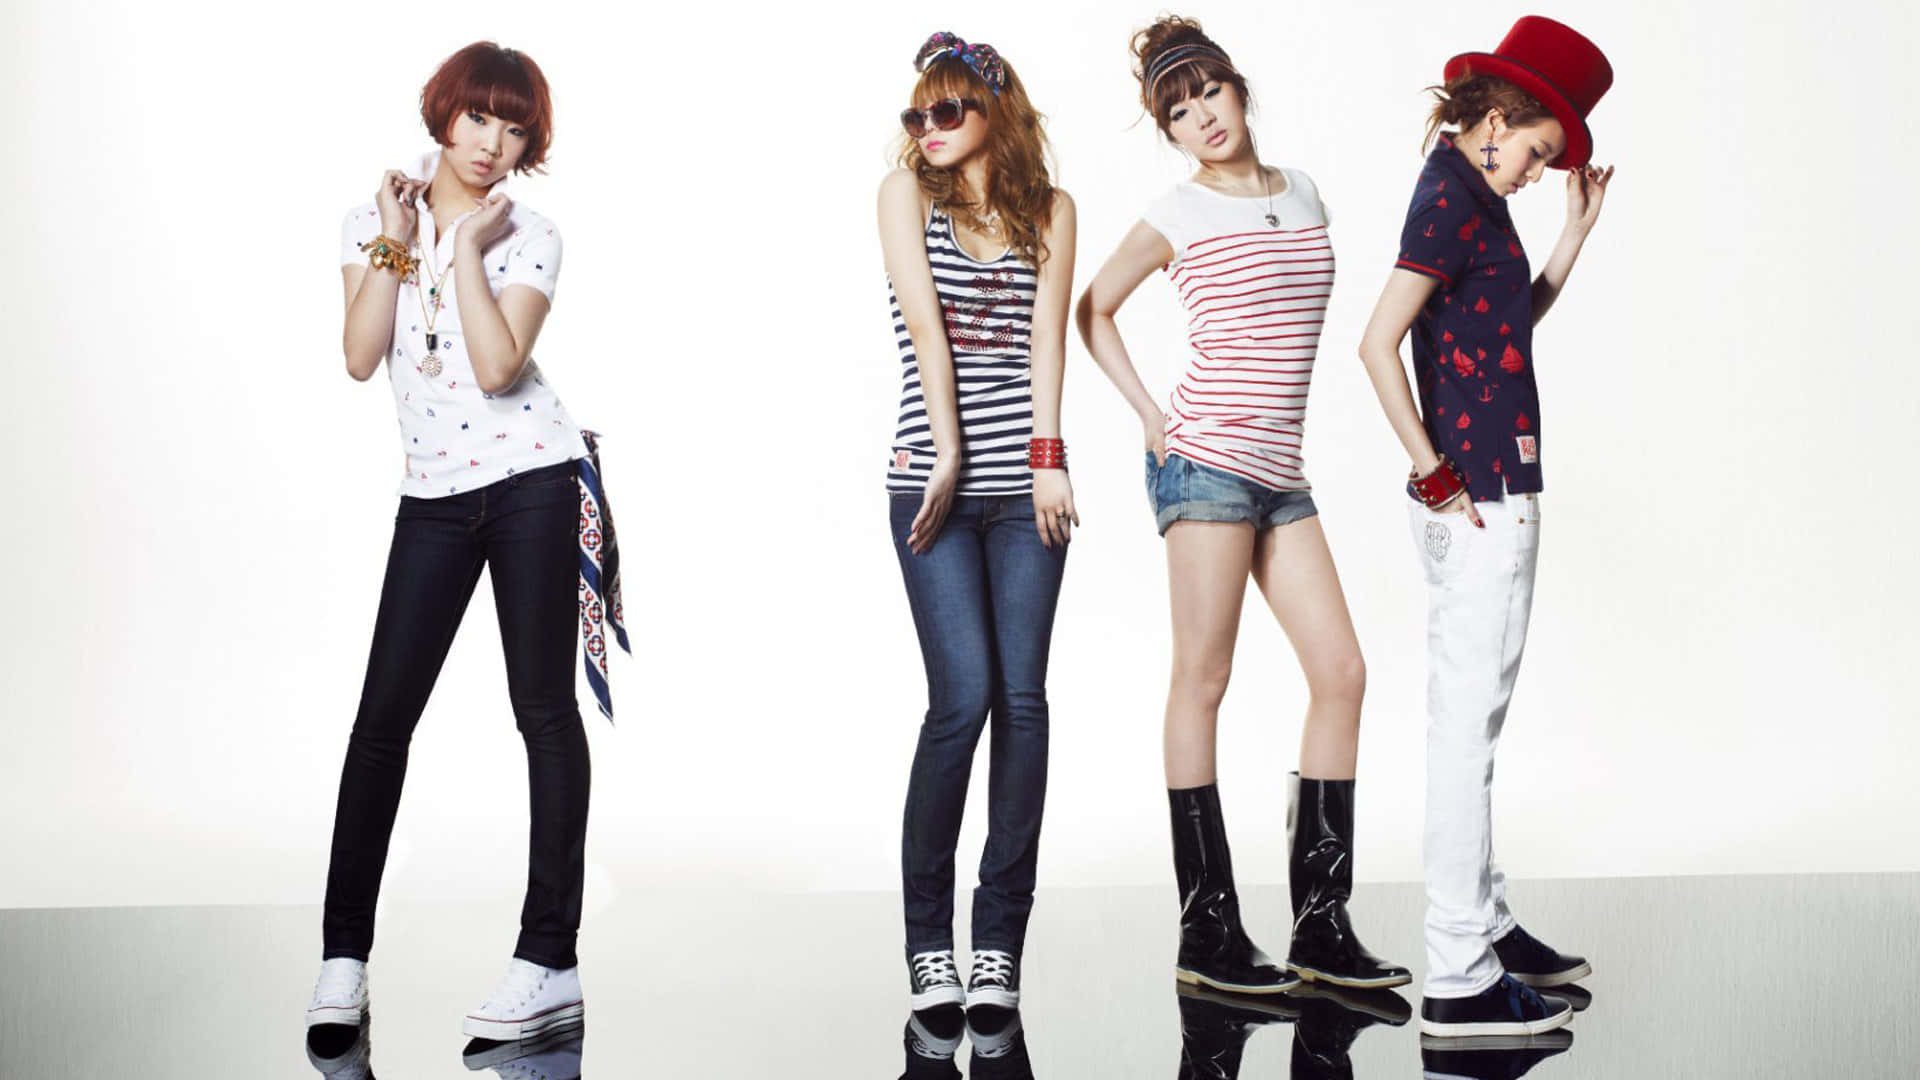 Be Powerful and Stylish with 2NE1's Music